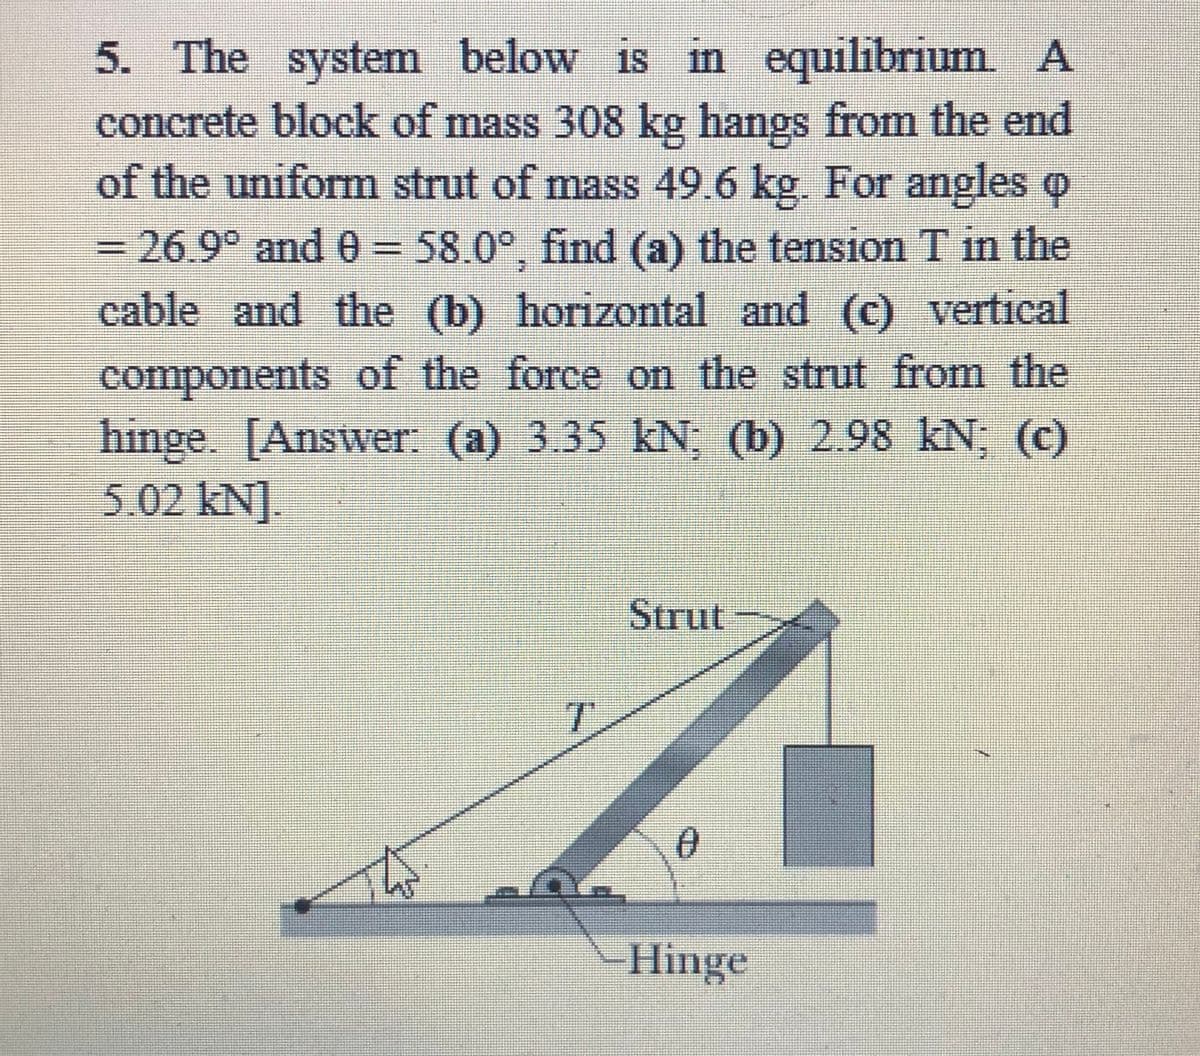 equilibrium A
5. The system below is in
concrete block of mass 308 kg hangs from the end
of the uniform strut of mass 49.6 kg. For angles o
3D26.9° and 0=58.0°, find (a) the tension T in the
cable and the (b) horizontal and (c) vertical
components of the force on the strut from the
hinge. [Answer: (a) 3.35 kN; (b) 2.98 kN; (c)
5.02 kN].
Strut
T.
Hinge
